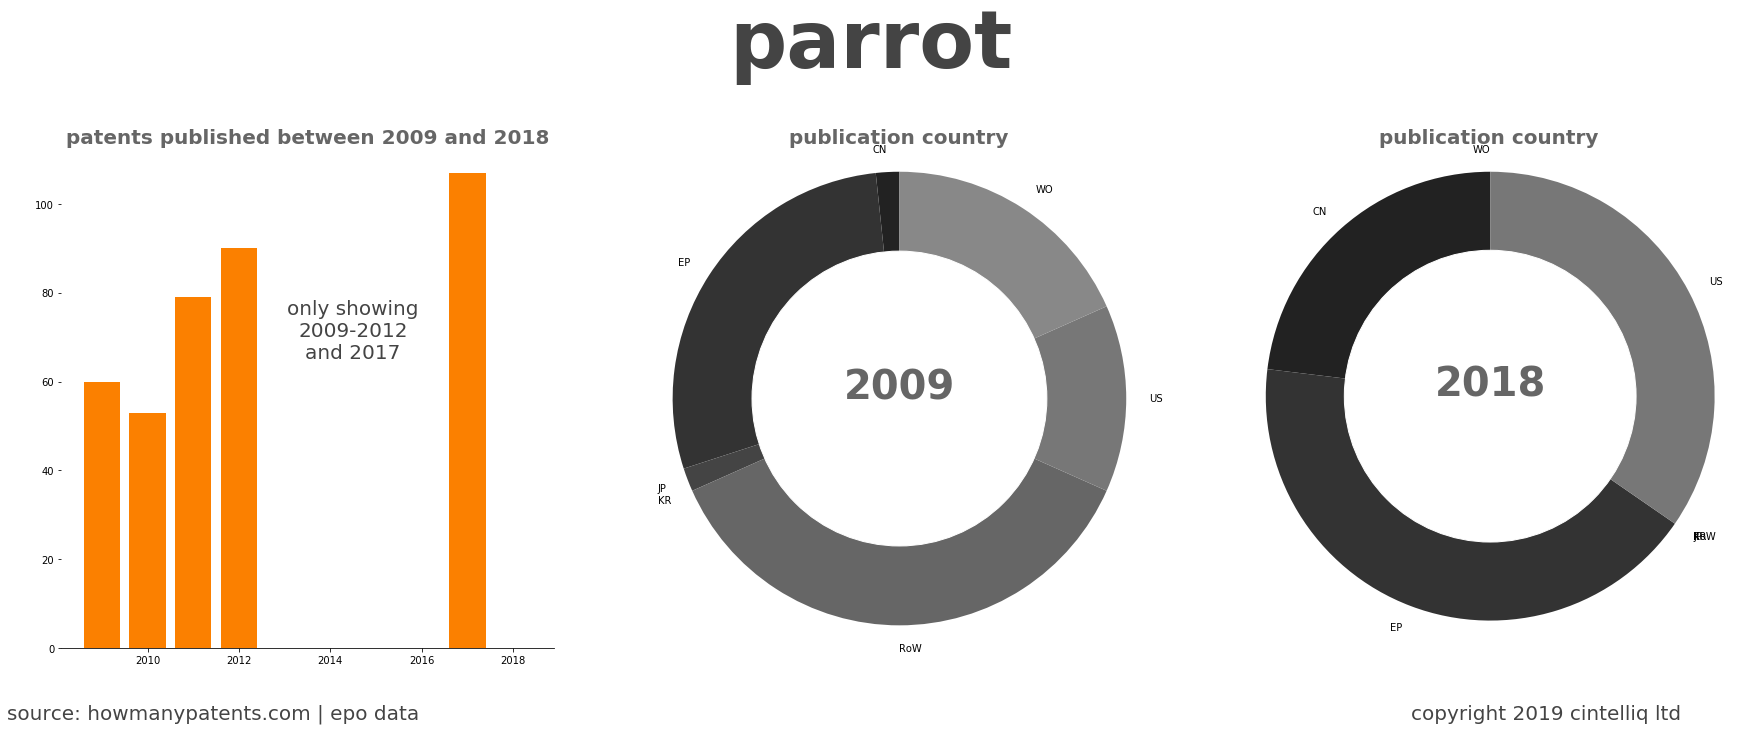 summary of patents for Parrot